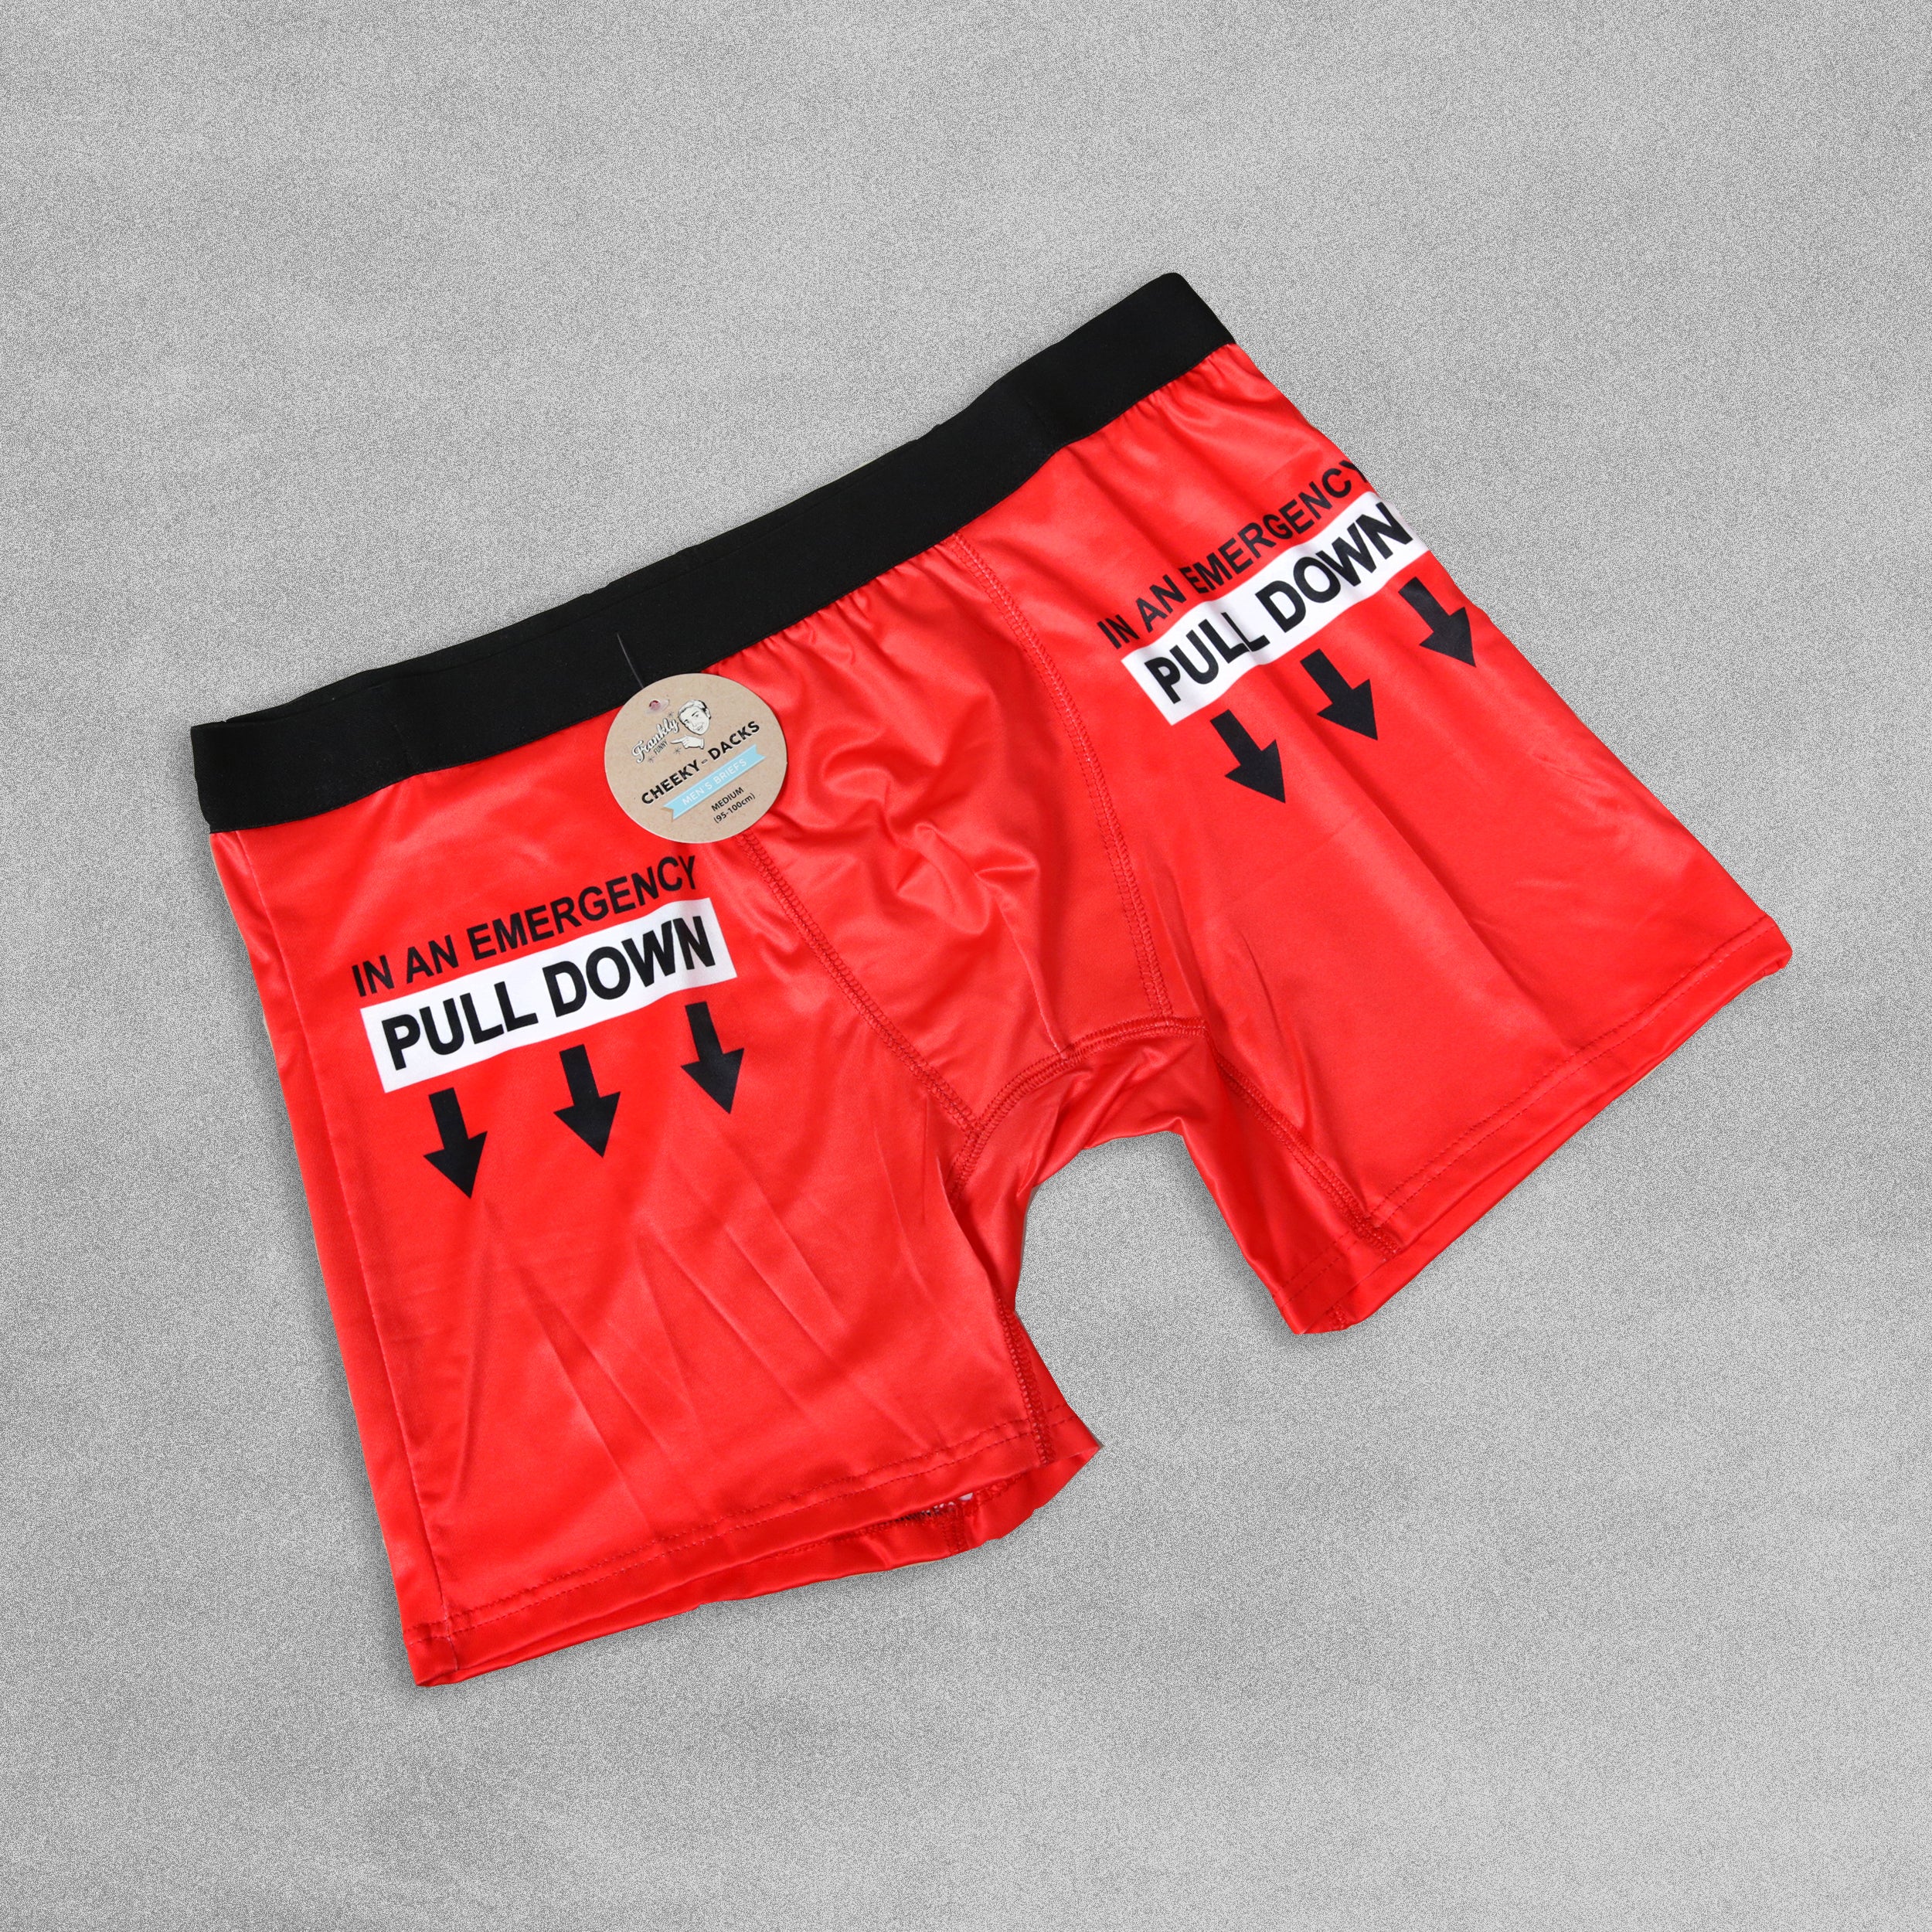 Mens Novelty Boxer Shorts - In An Emergency Pull Down!